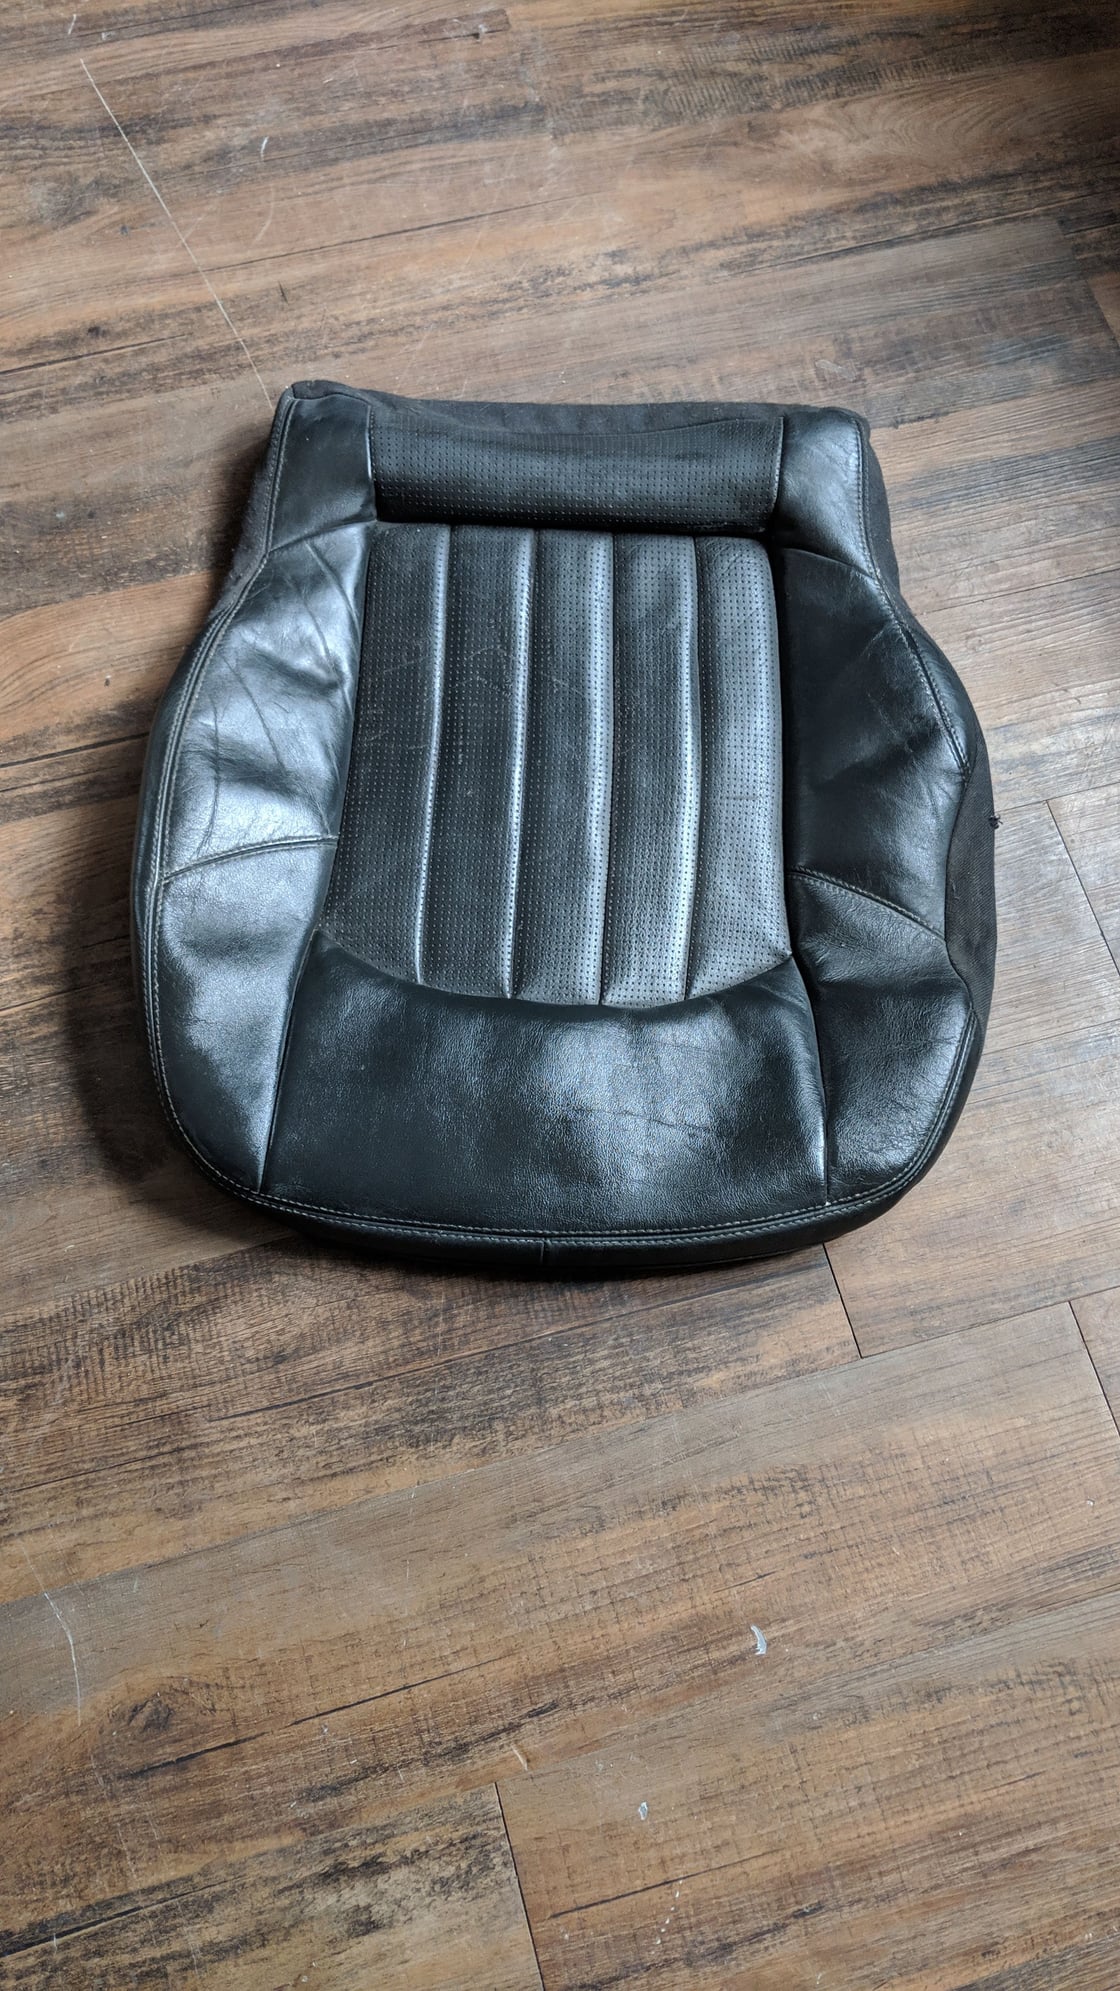 Interior/Upholstery - 2003/2004 CLK55AMG Passenger Lower Seat Cover - Used - 2003 to 2004 Mercedes-Benz CLK55 AMG - Wilmette, IL 60091, United States